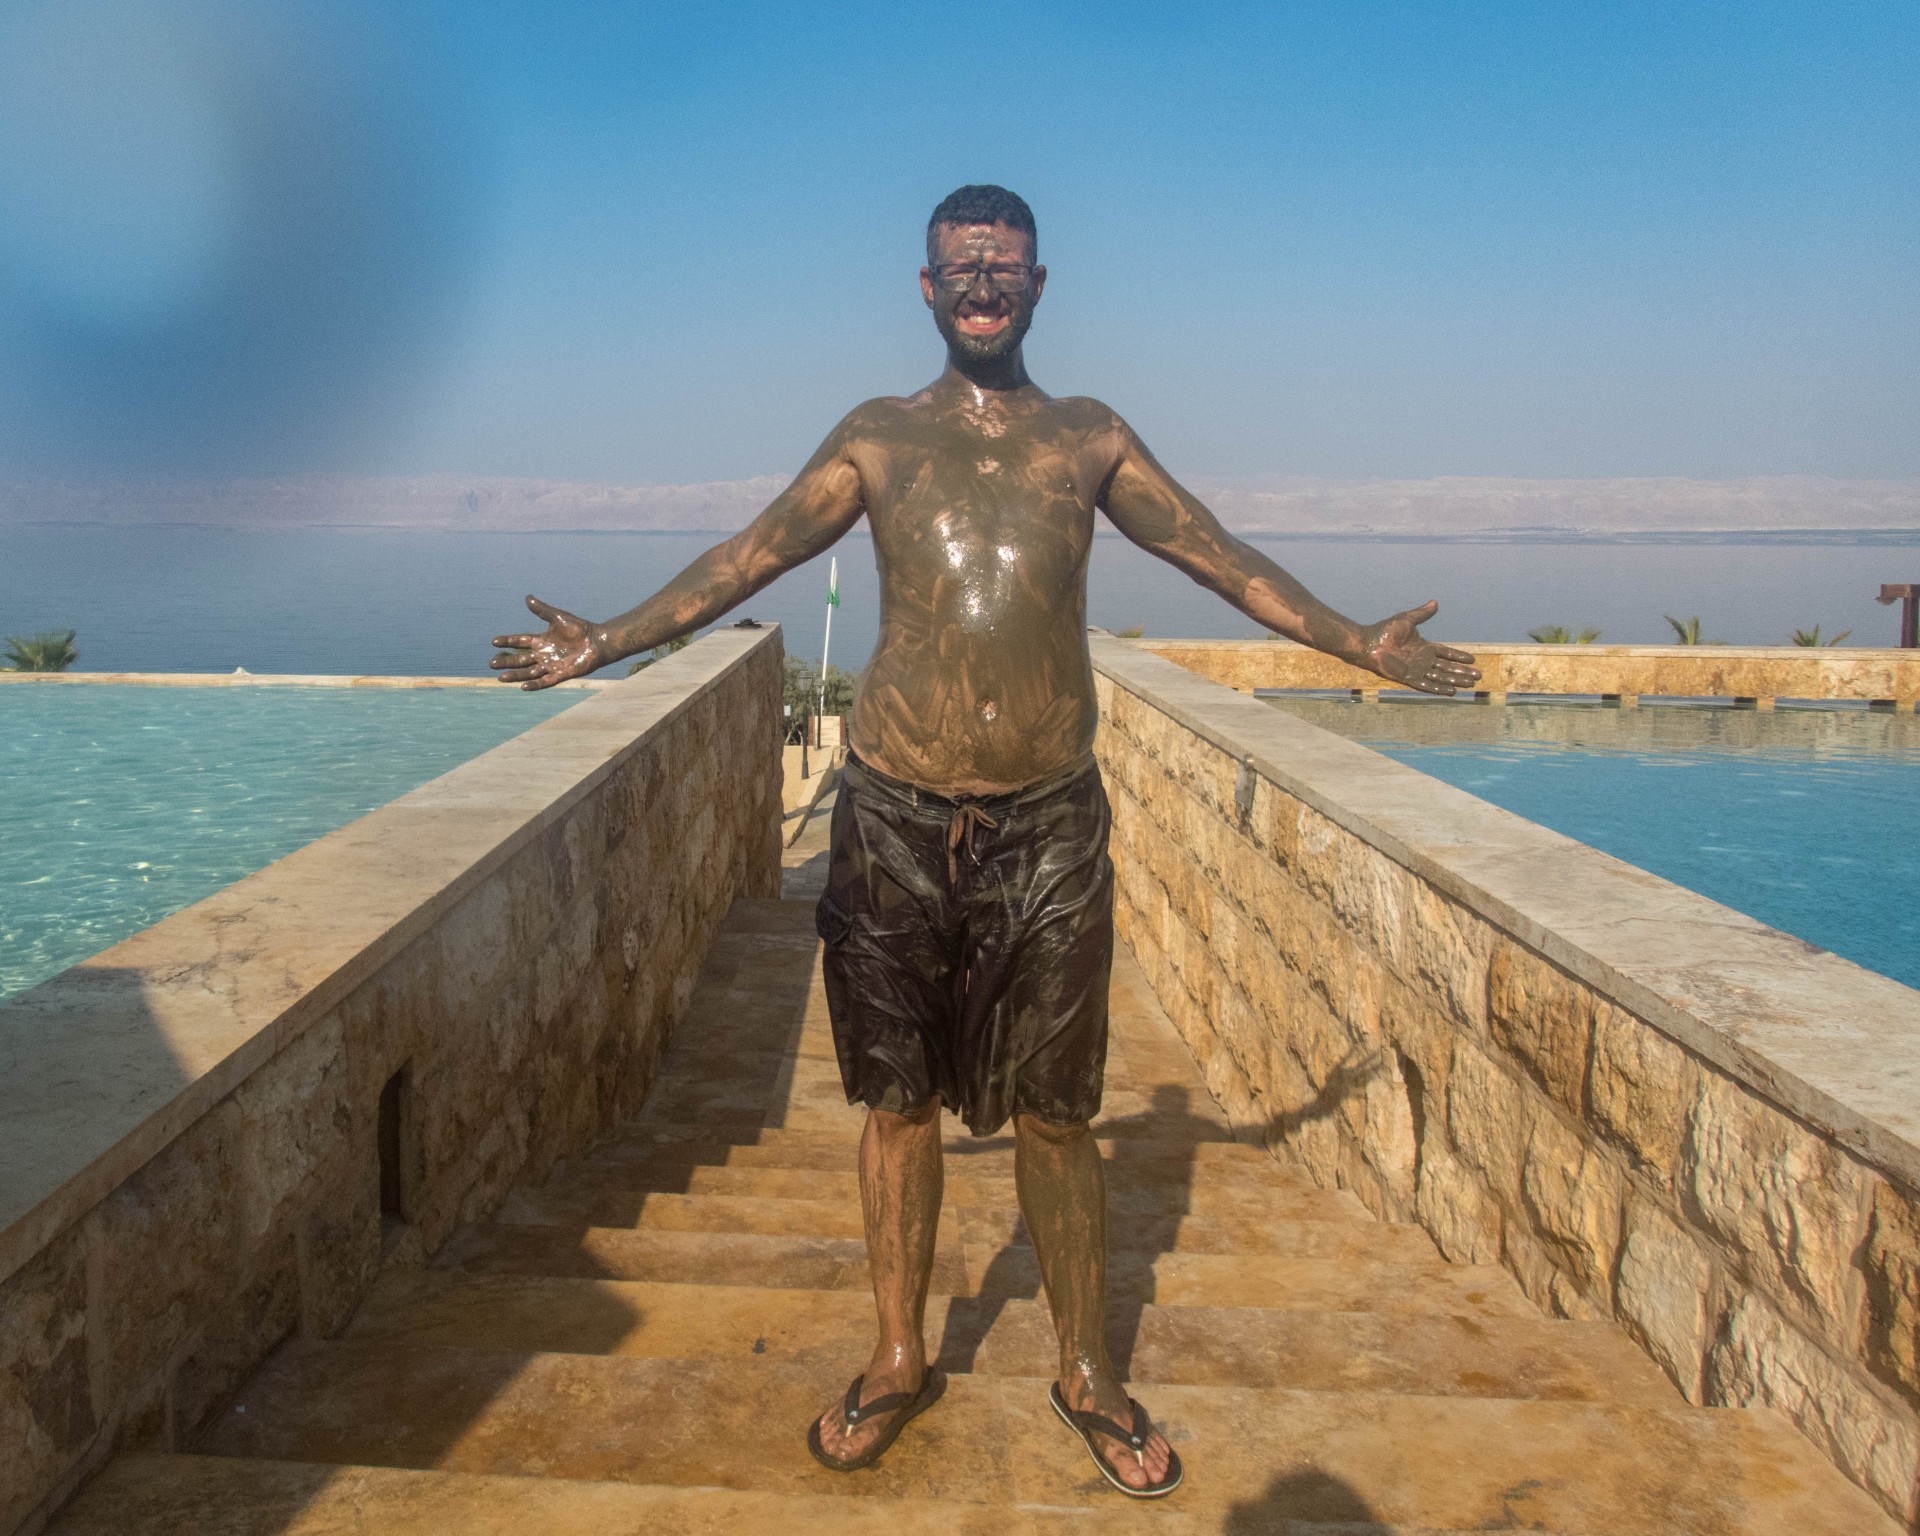 Kevin shows off his muddy body in front of the Dead Sea